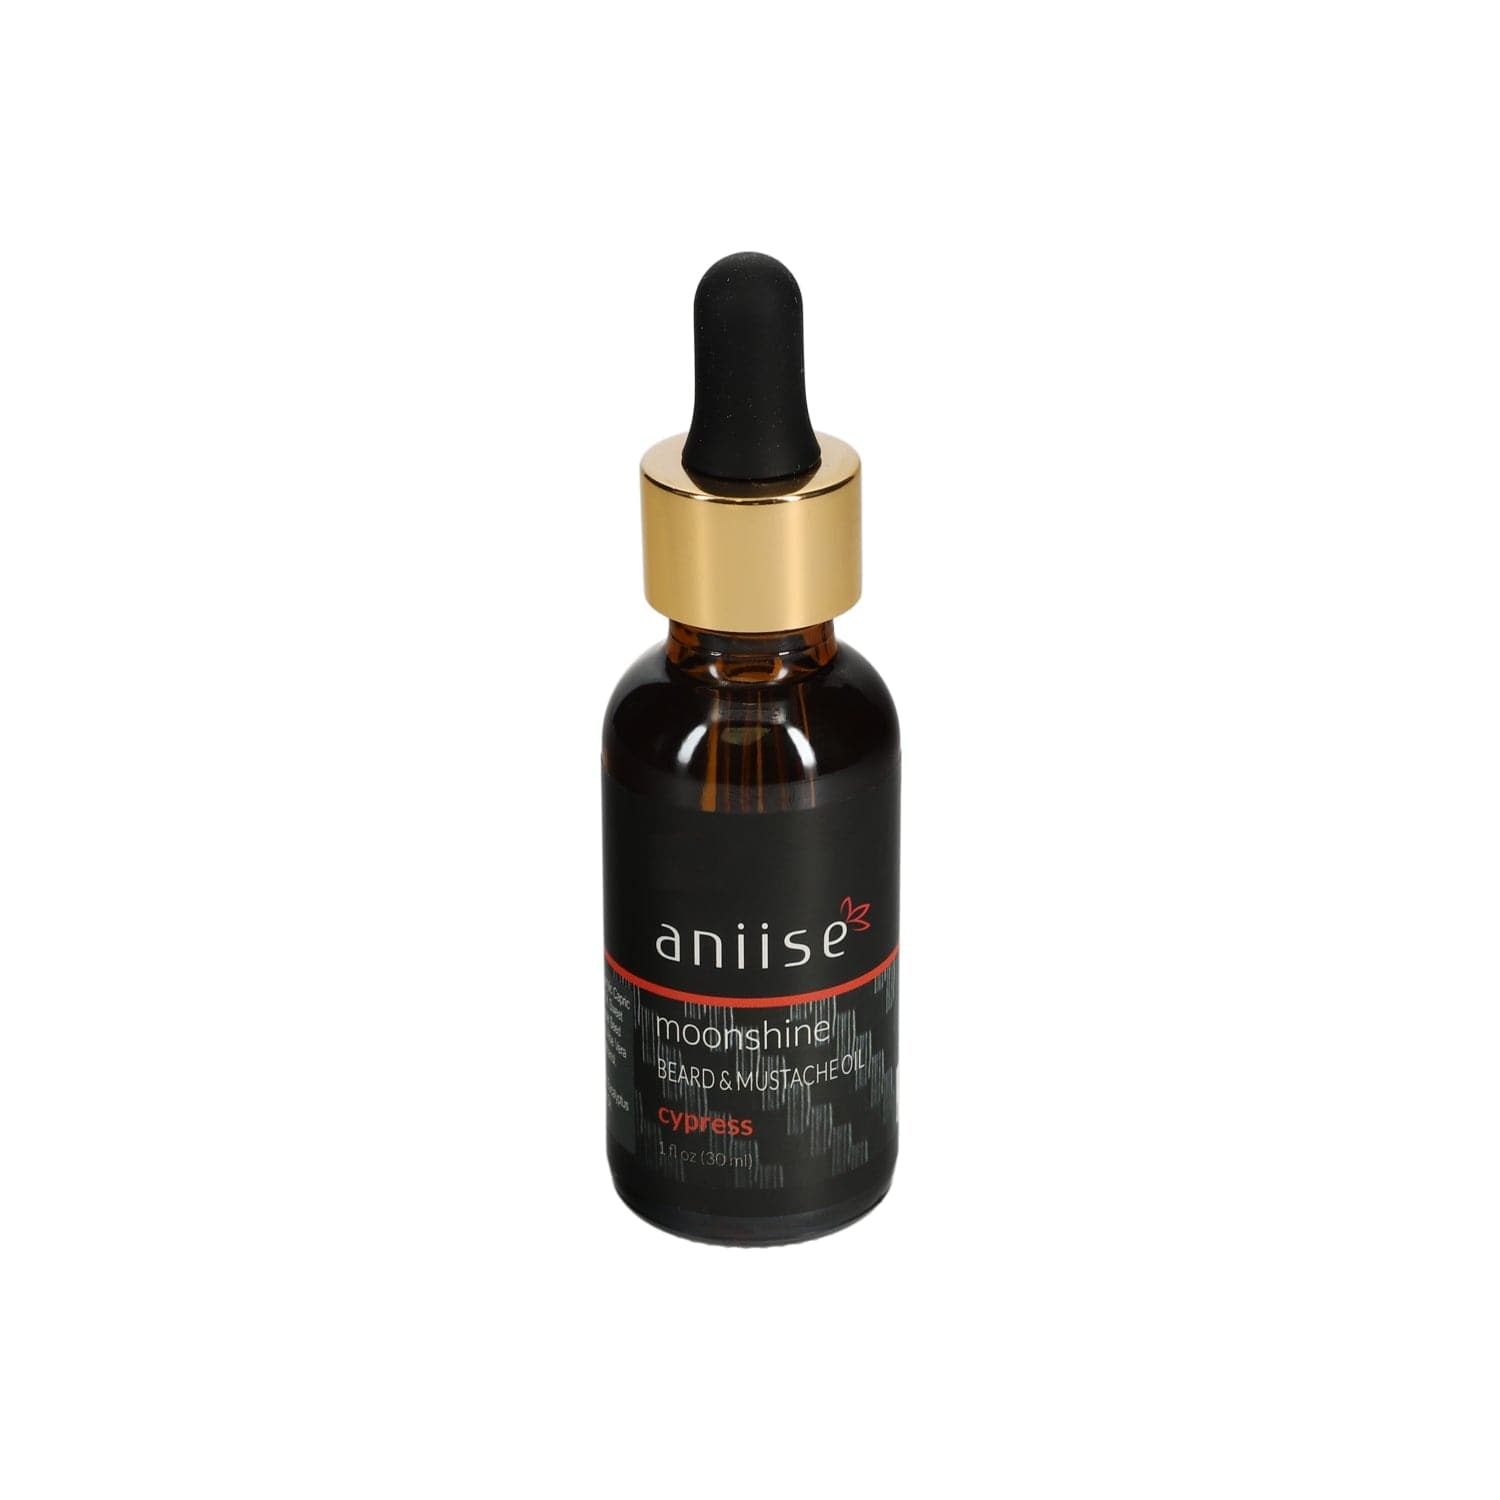 Moonshine Beard and Mustache Oil by Aniise